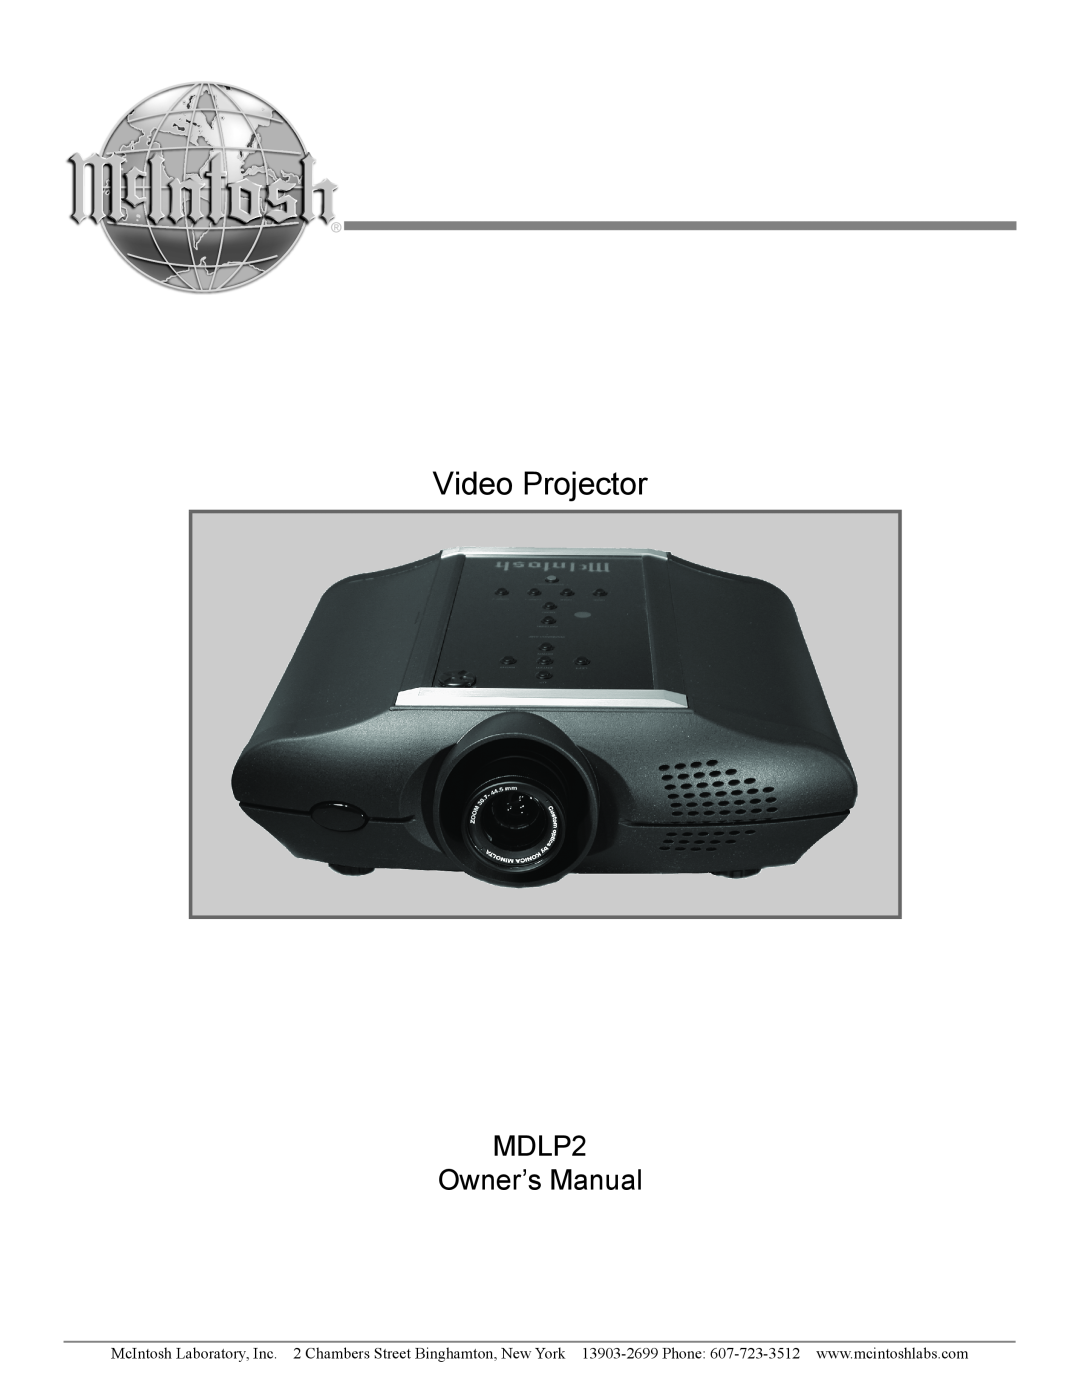 McIntosh owner manual Video Projector, MDLP2 Owner’s Manual 